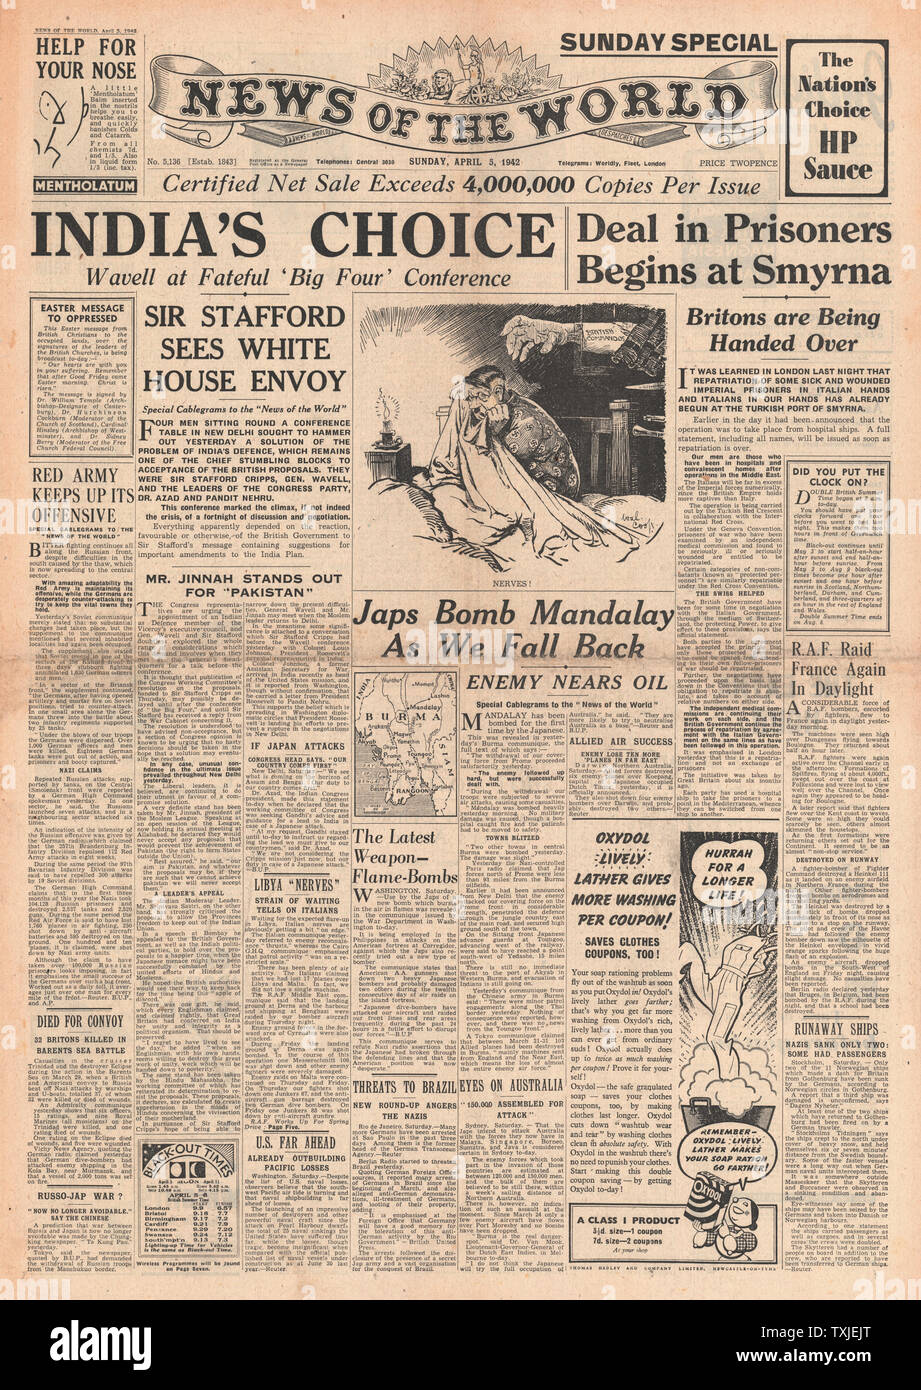 1942 front page News of the World Diplomatic Talks in India and Japanese Airforce Bomb Mandalay as British forces Retreat in Burma Stock Photo